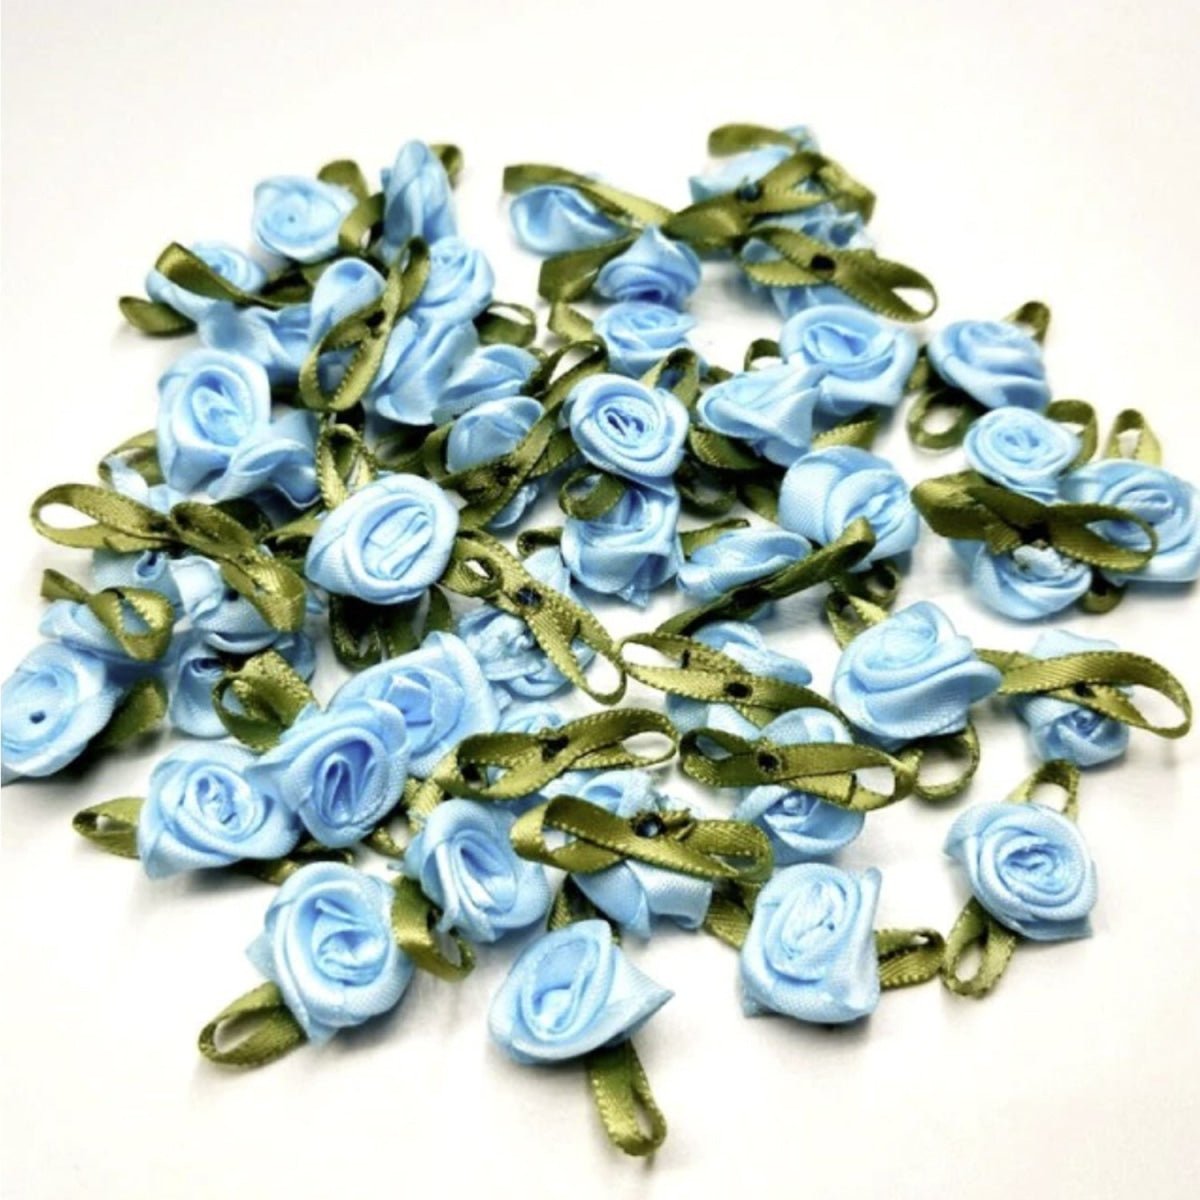 40pcs Mini Artificial Flowers Heads Small Ribbon Roses DIY Crafts Wedding Decorations - Blue - - Asia Sell